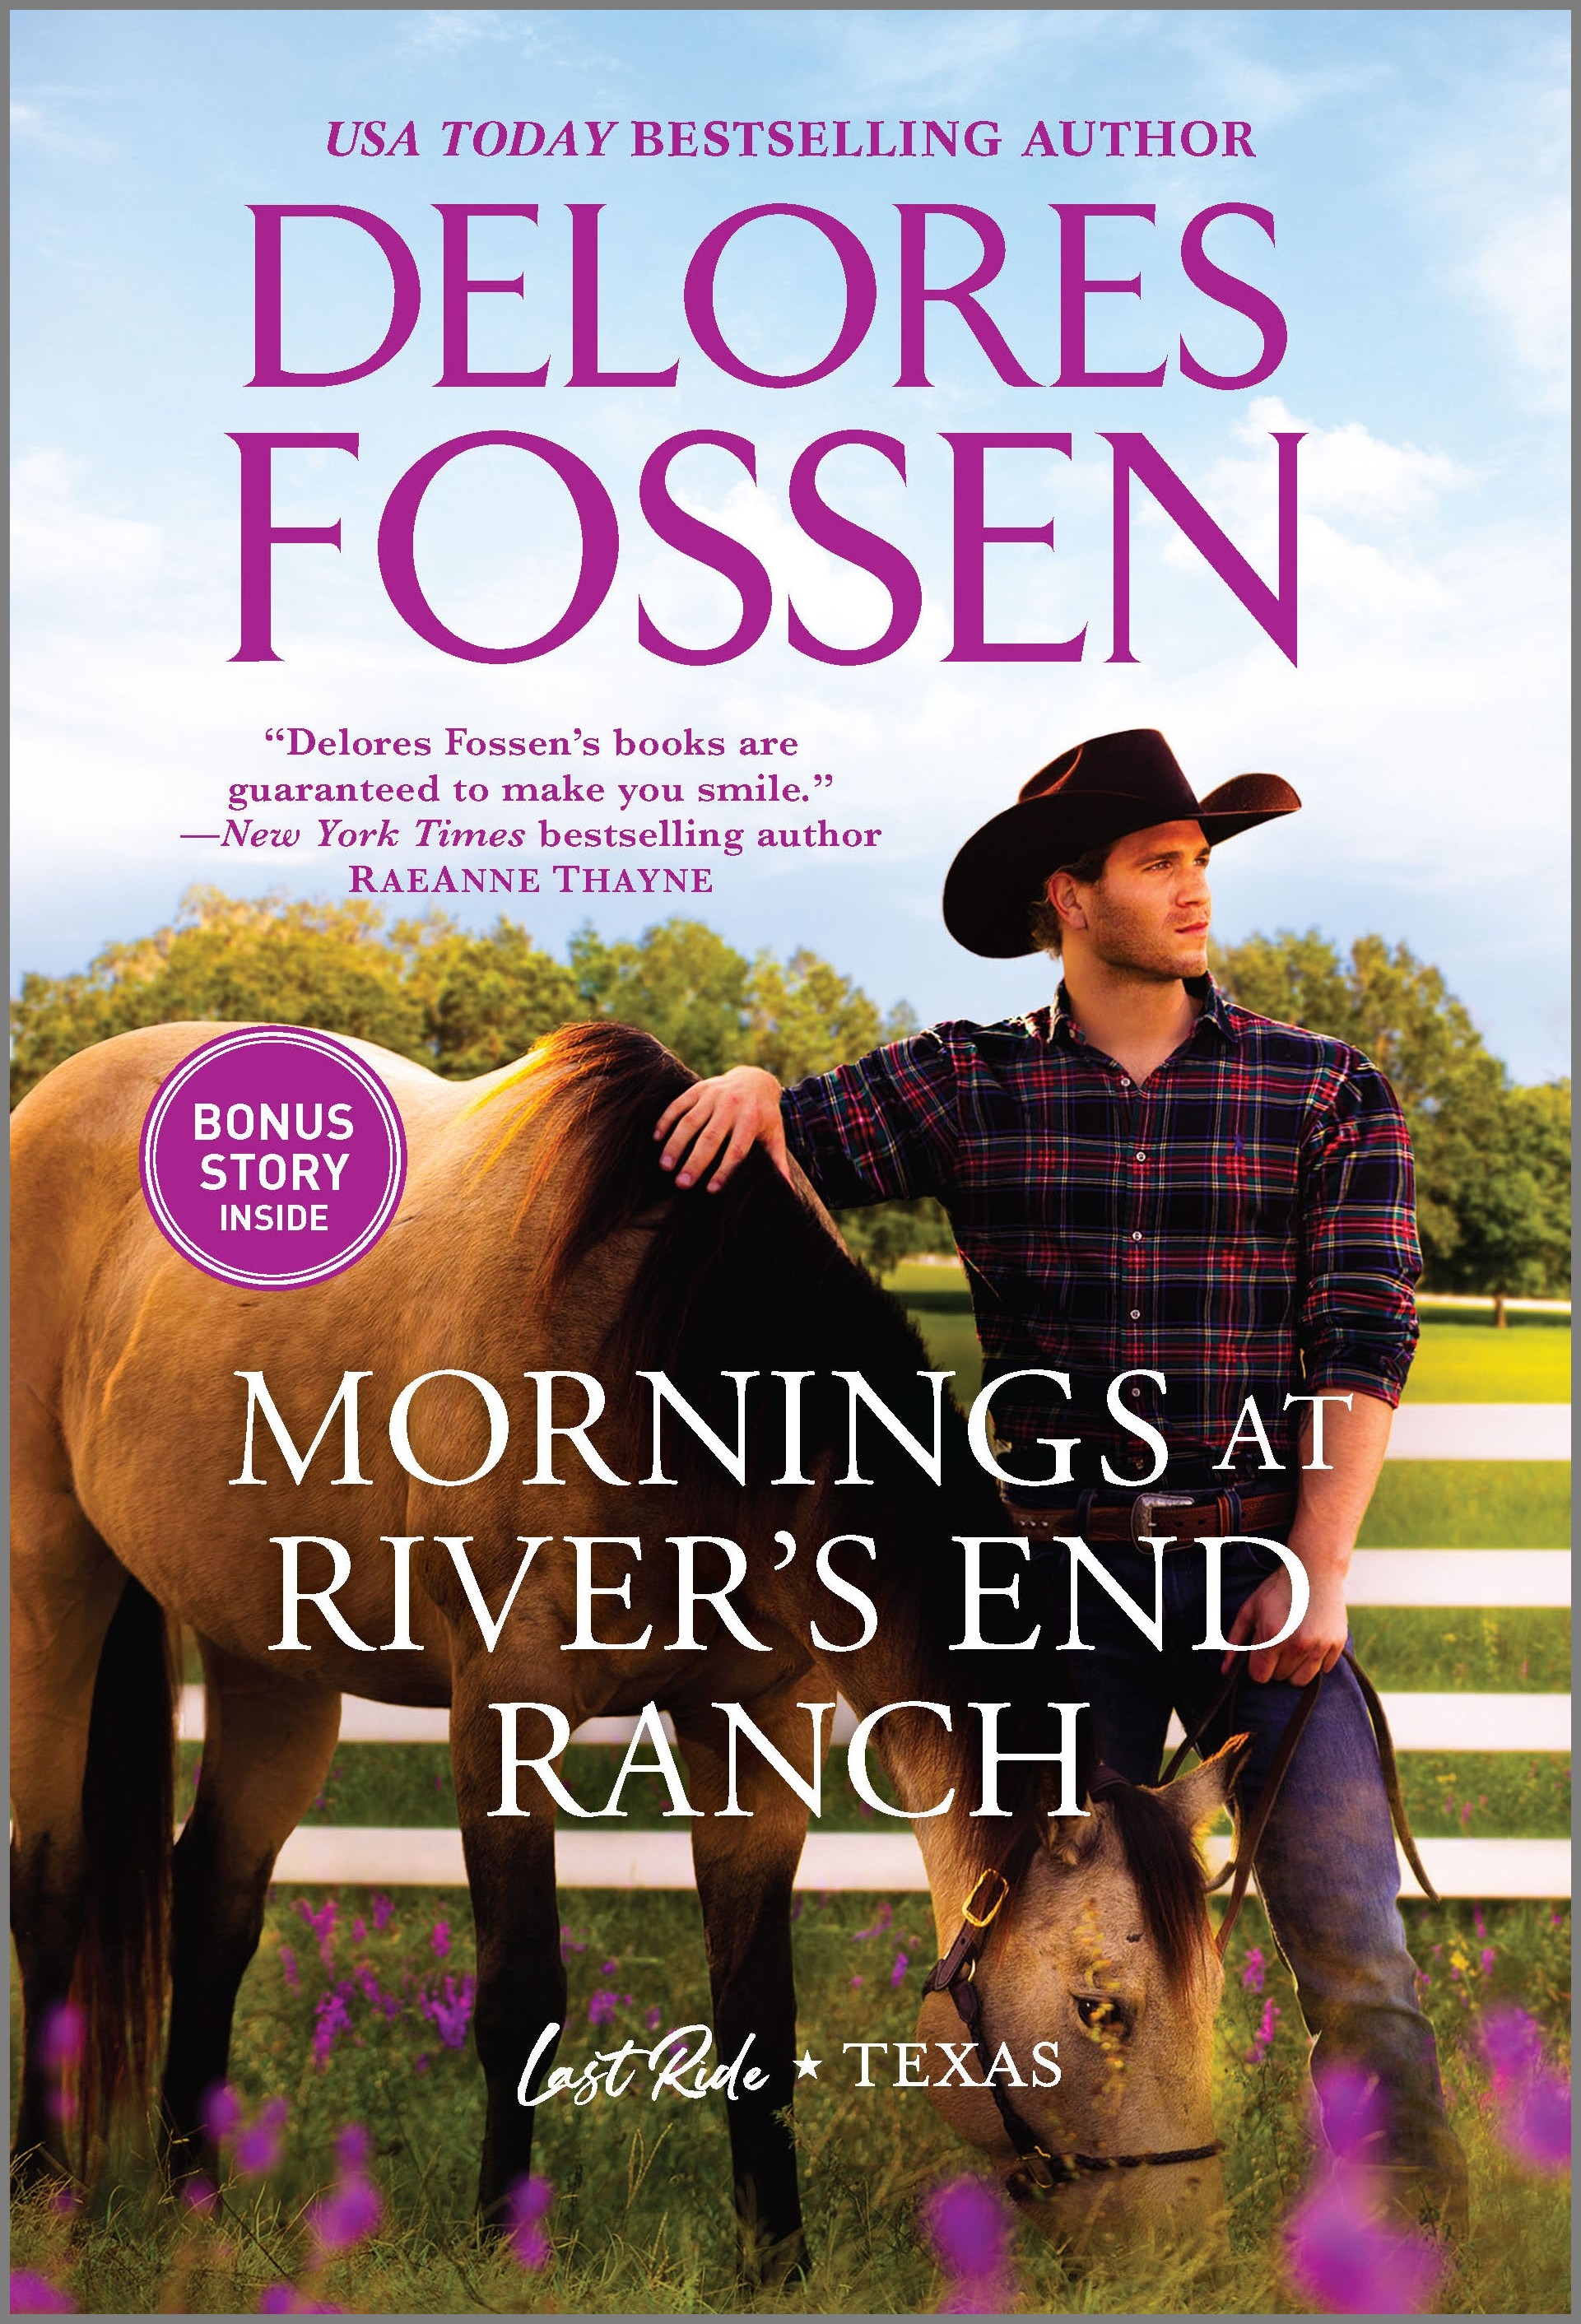 MORNING AT THE RIVER'S END RANCH by Delores Fossen